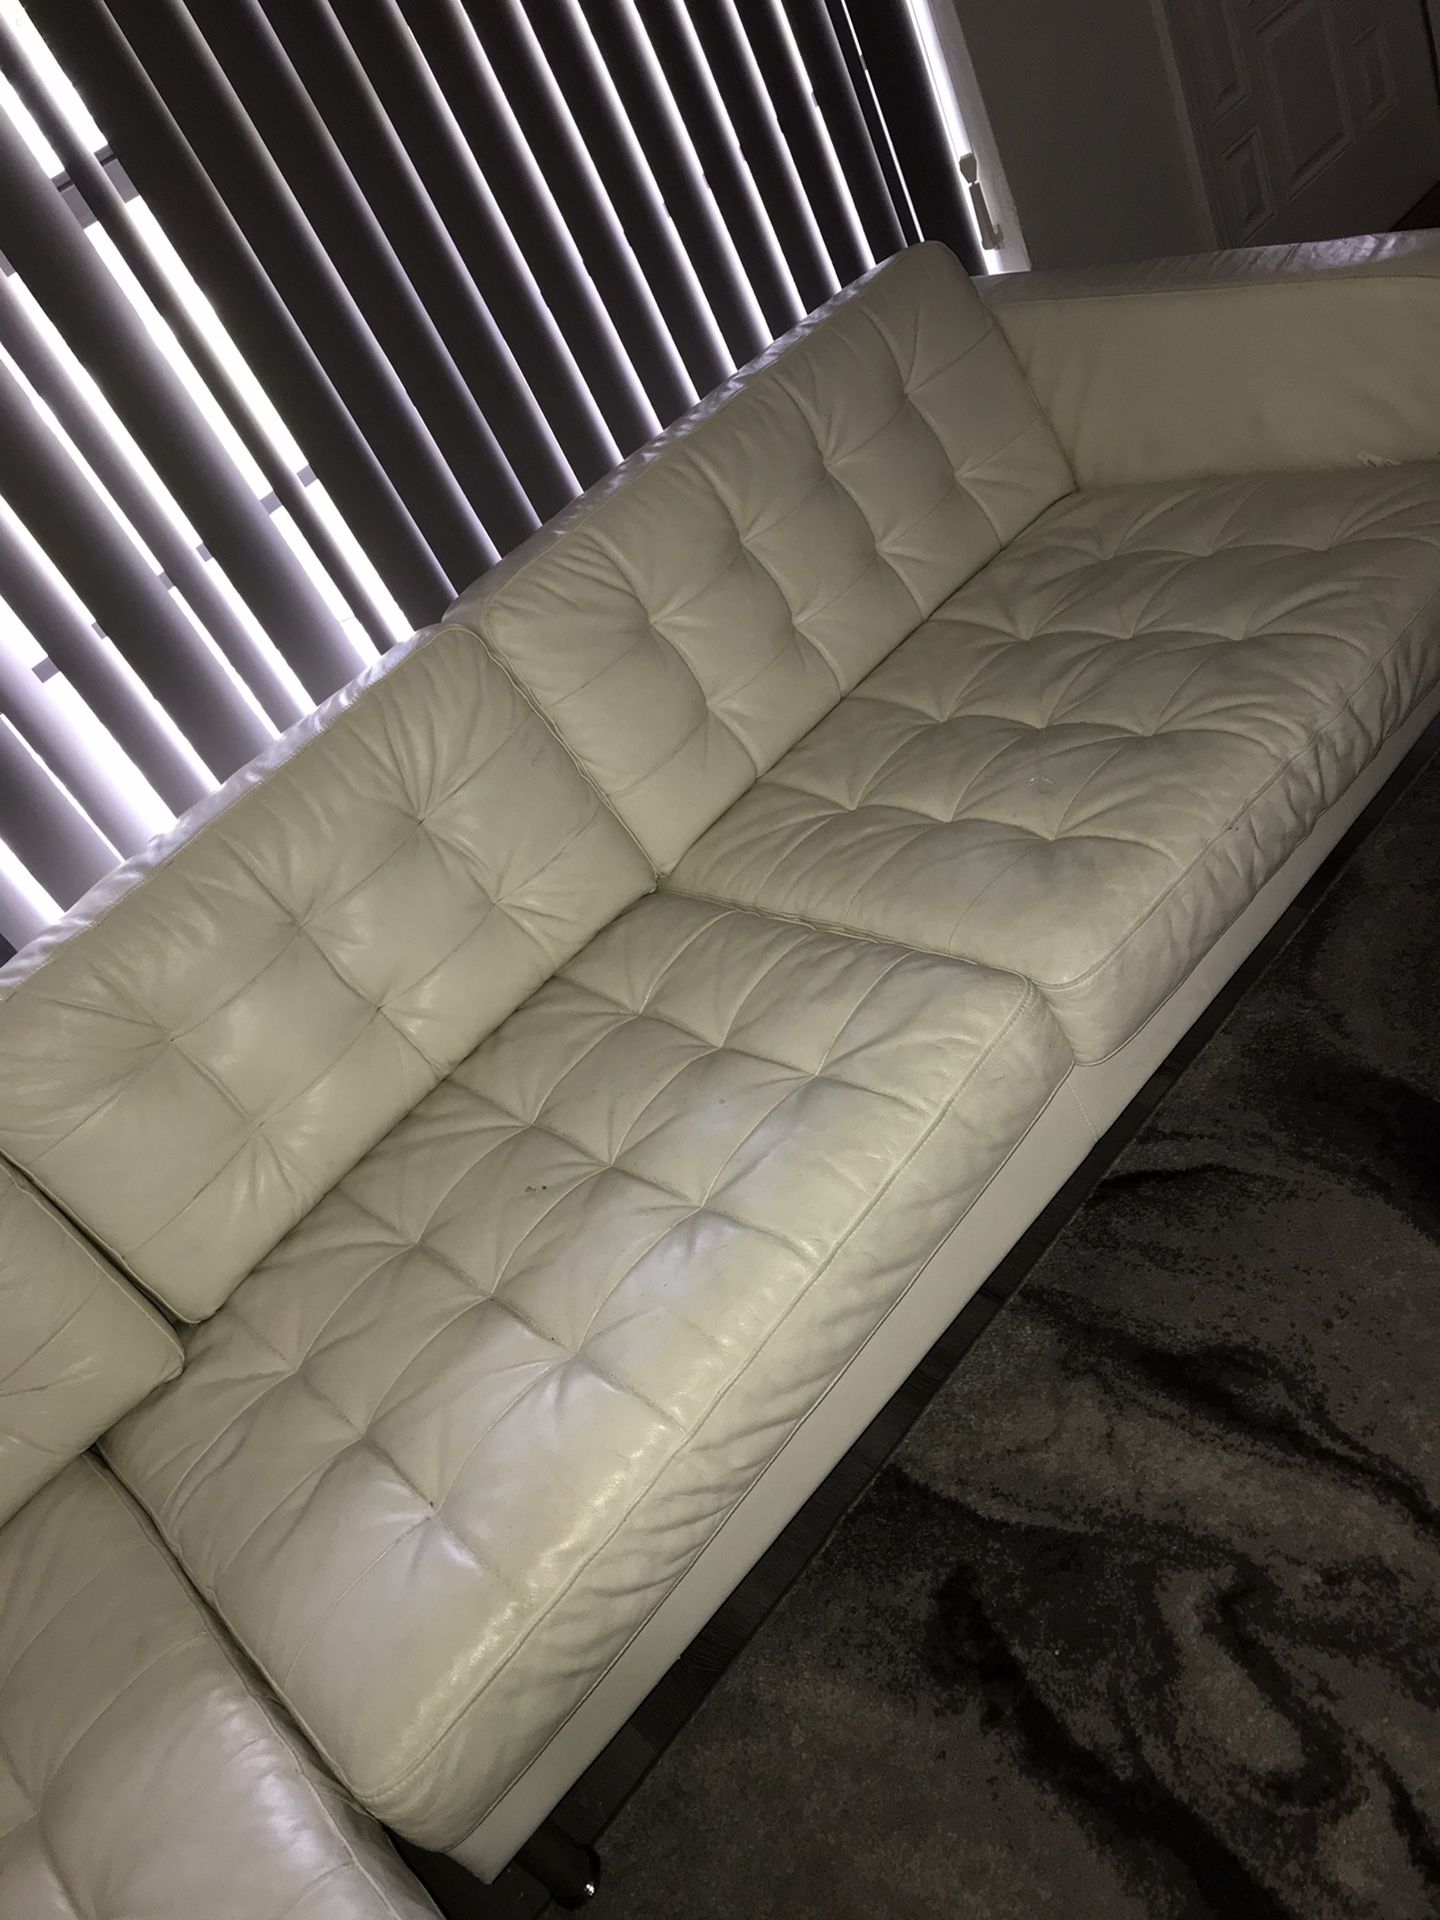 White sectional couch